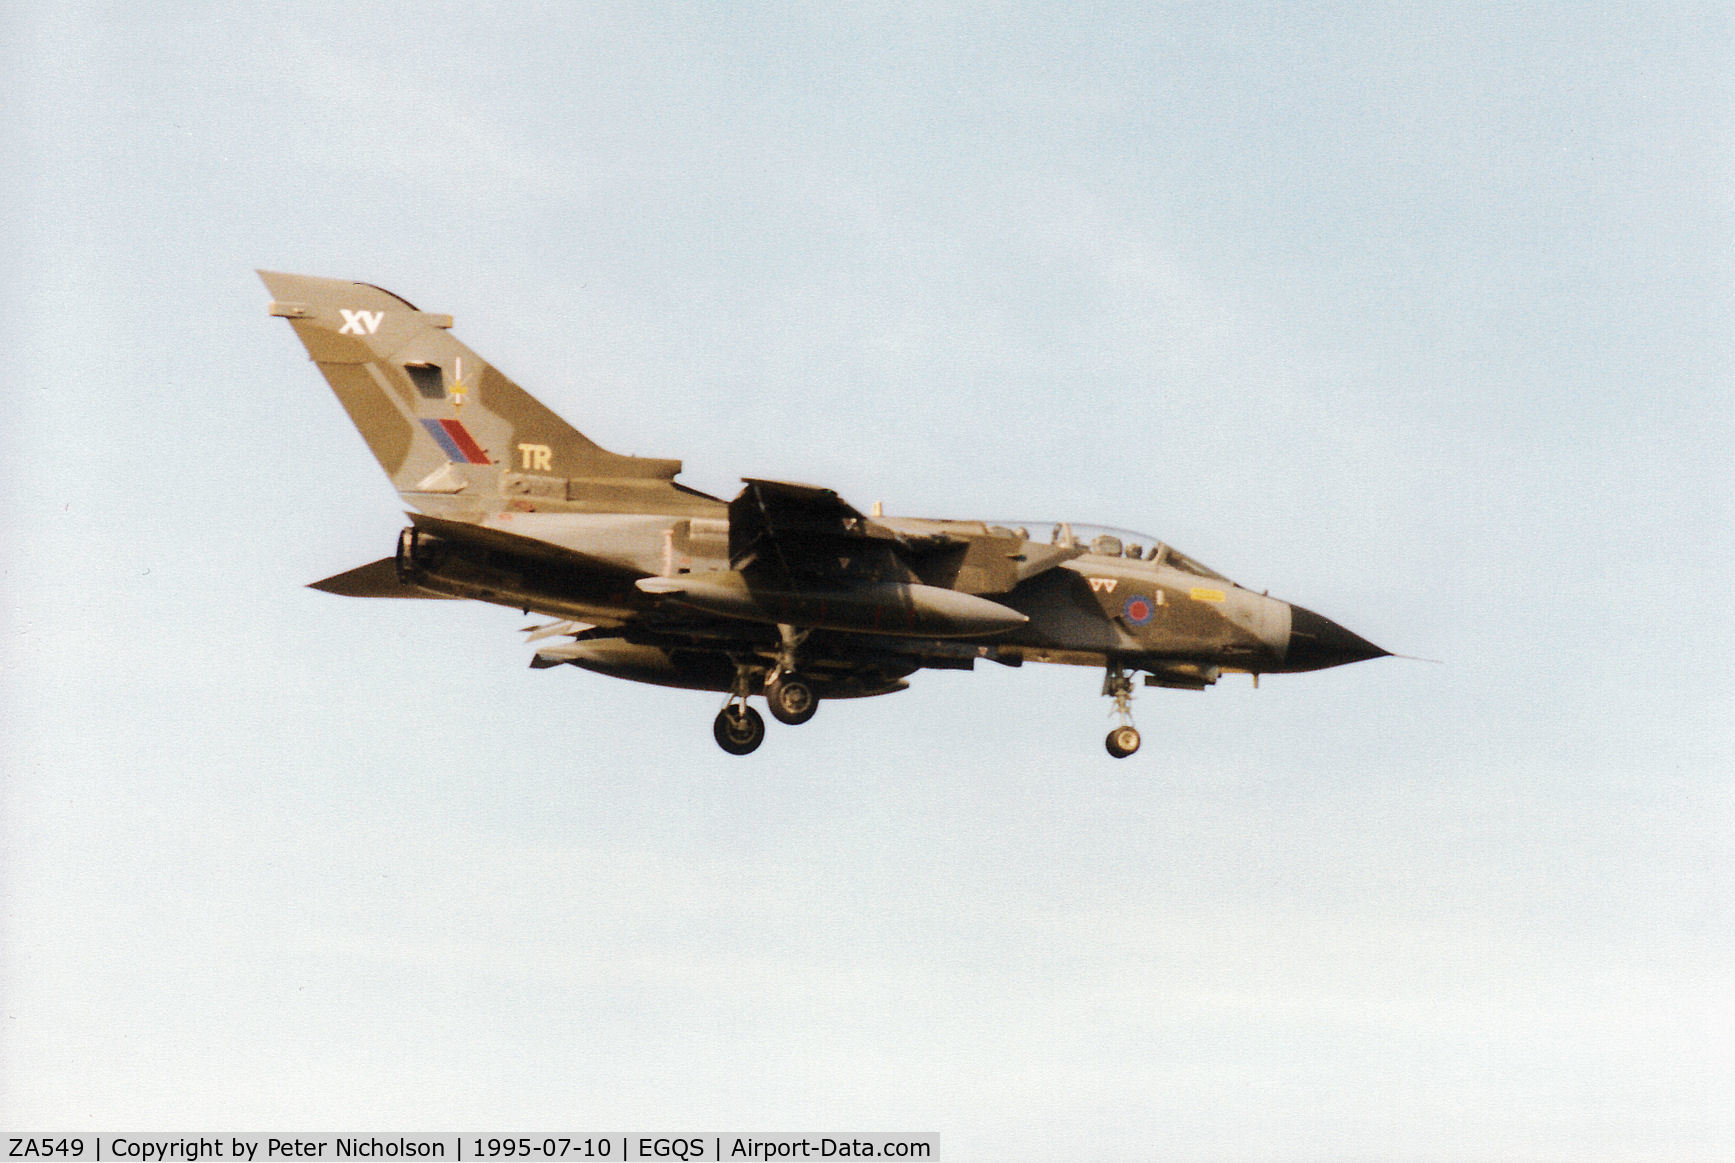 ZA549, 1981 Panavia Tornado GR.1 C/N 063/BT017/3033, Tornado GR.1 of 15[Reserve] Squadron returning to Runway 10 at RAF Lossiemouth in the Summer of 1995.